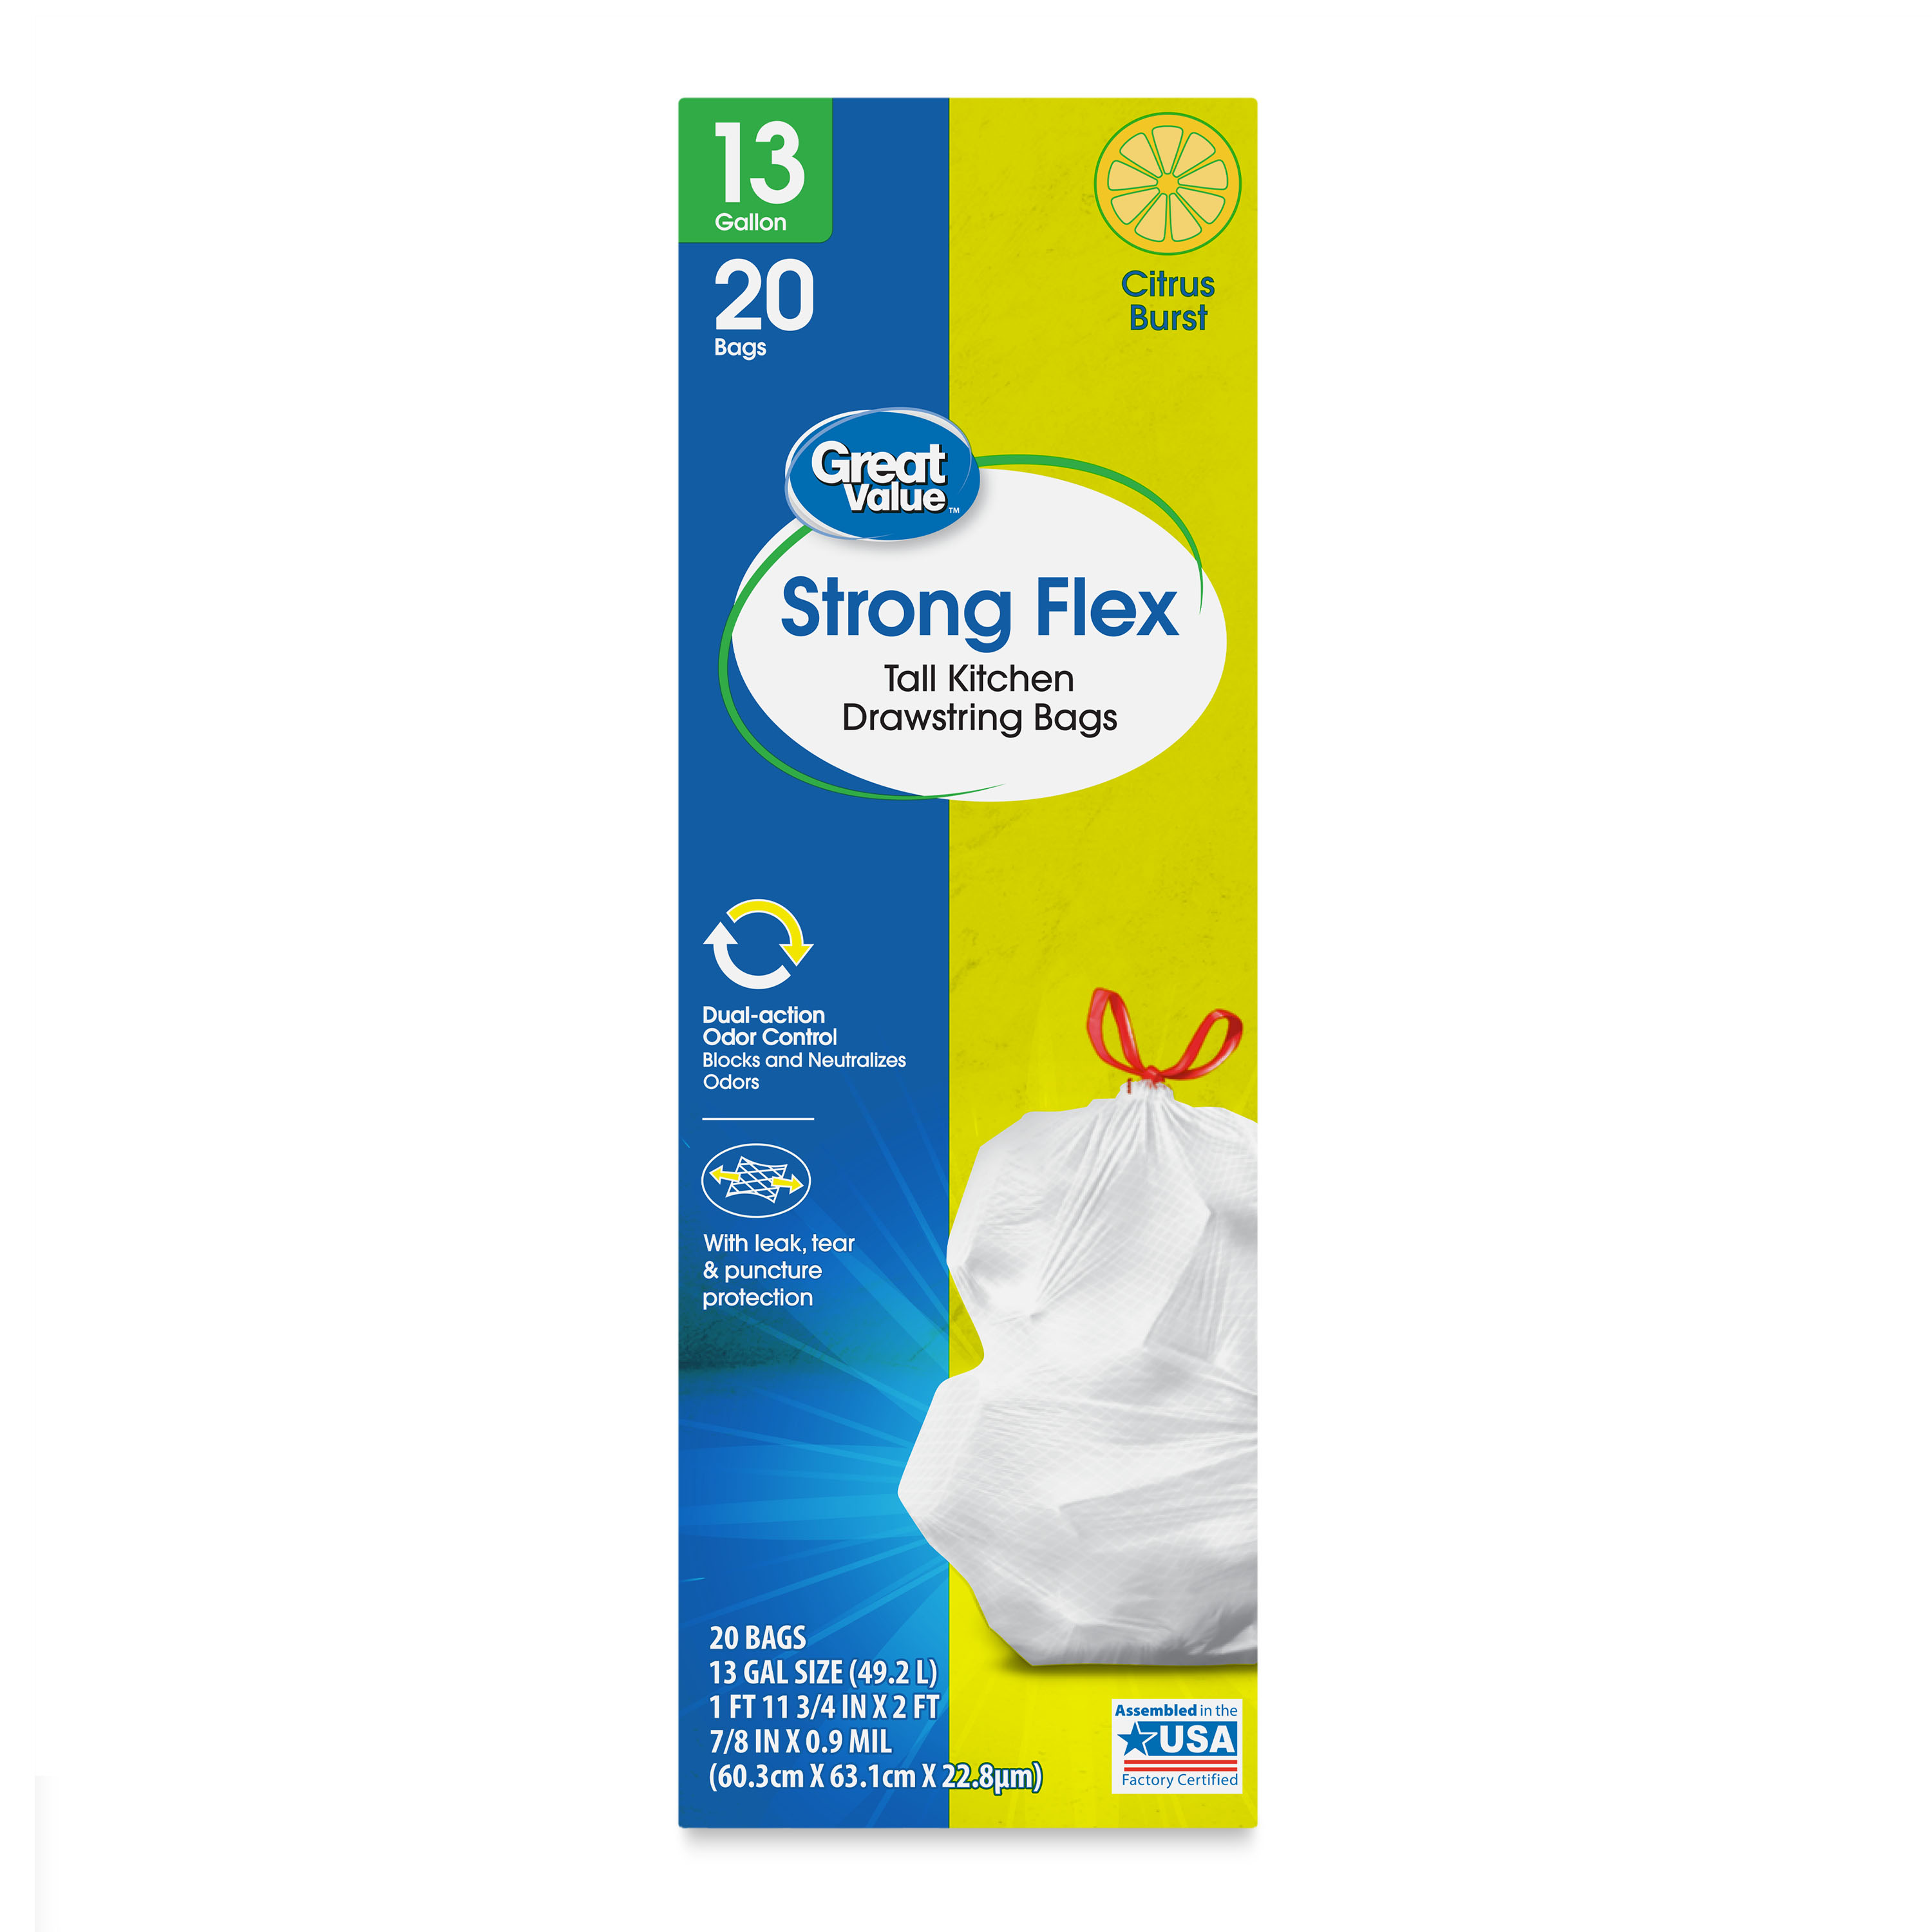 Great Value Strong Flex 13-Gallon Drawstring Tall Kitchen Trash Bags, Citrus Burst, 20 Count - image 1 of 8